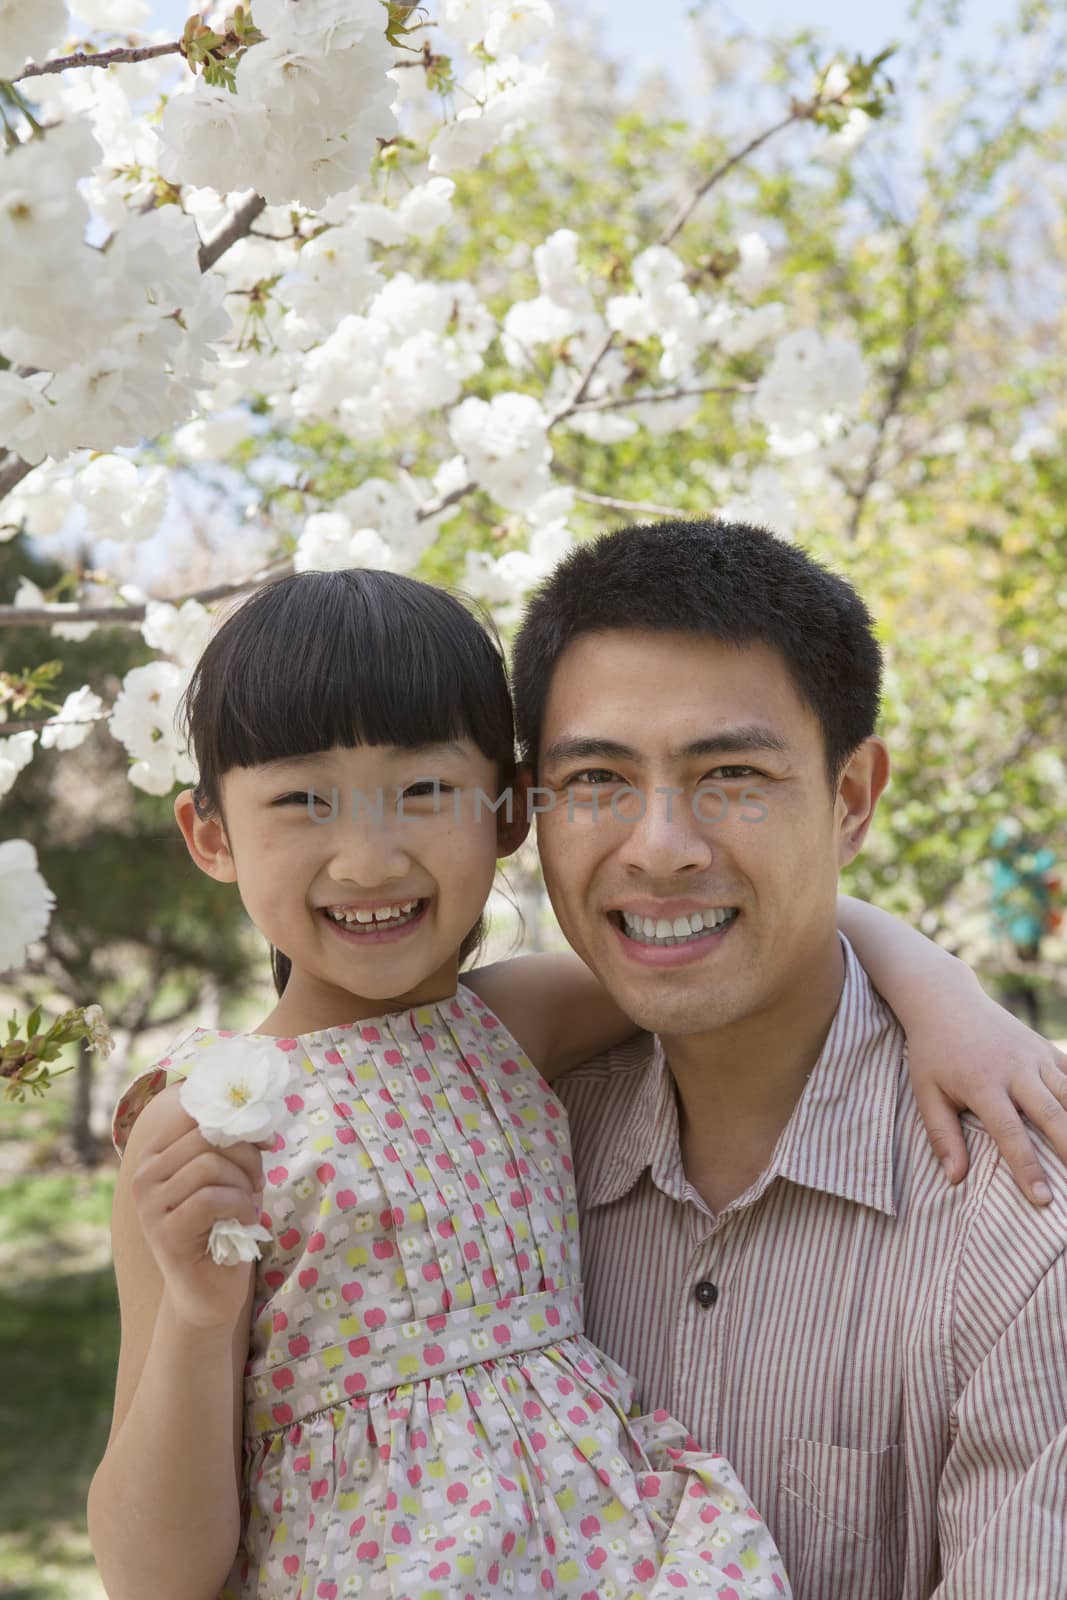 Smiling father and daughter enjoying the cherry blossoms on the tree in the park in springtime, portrait